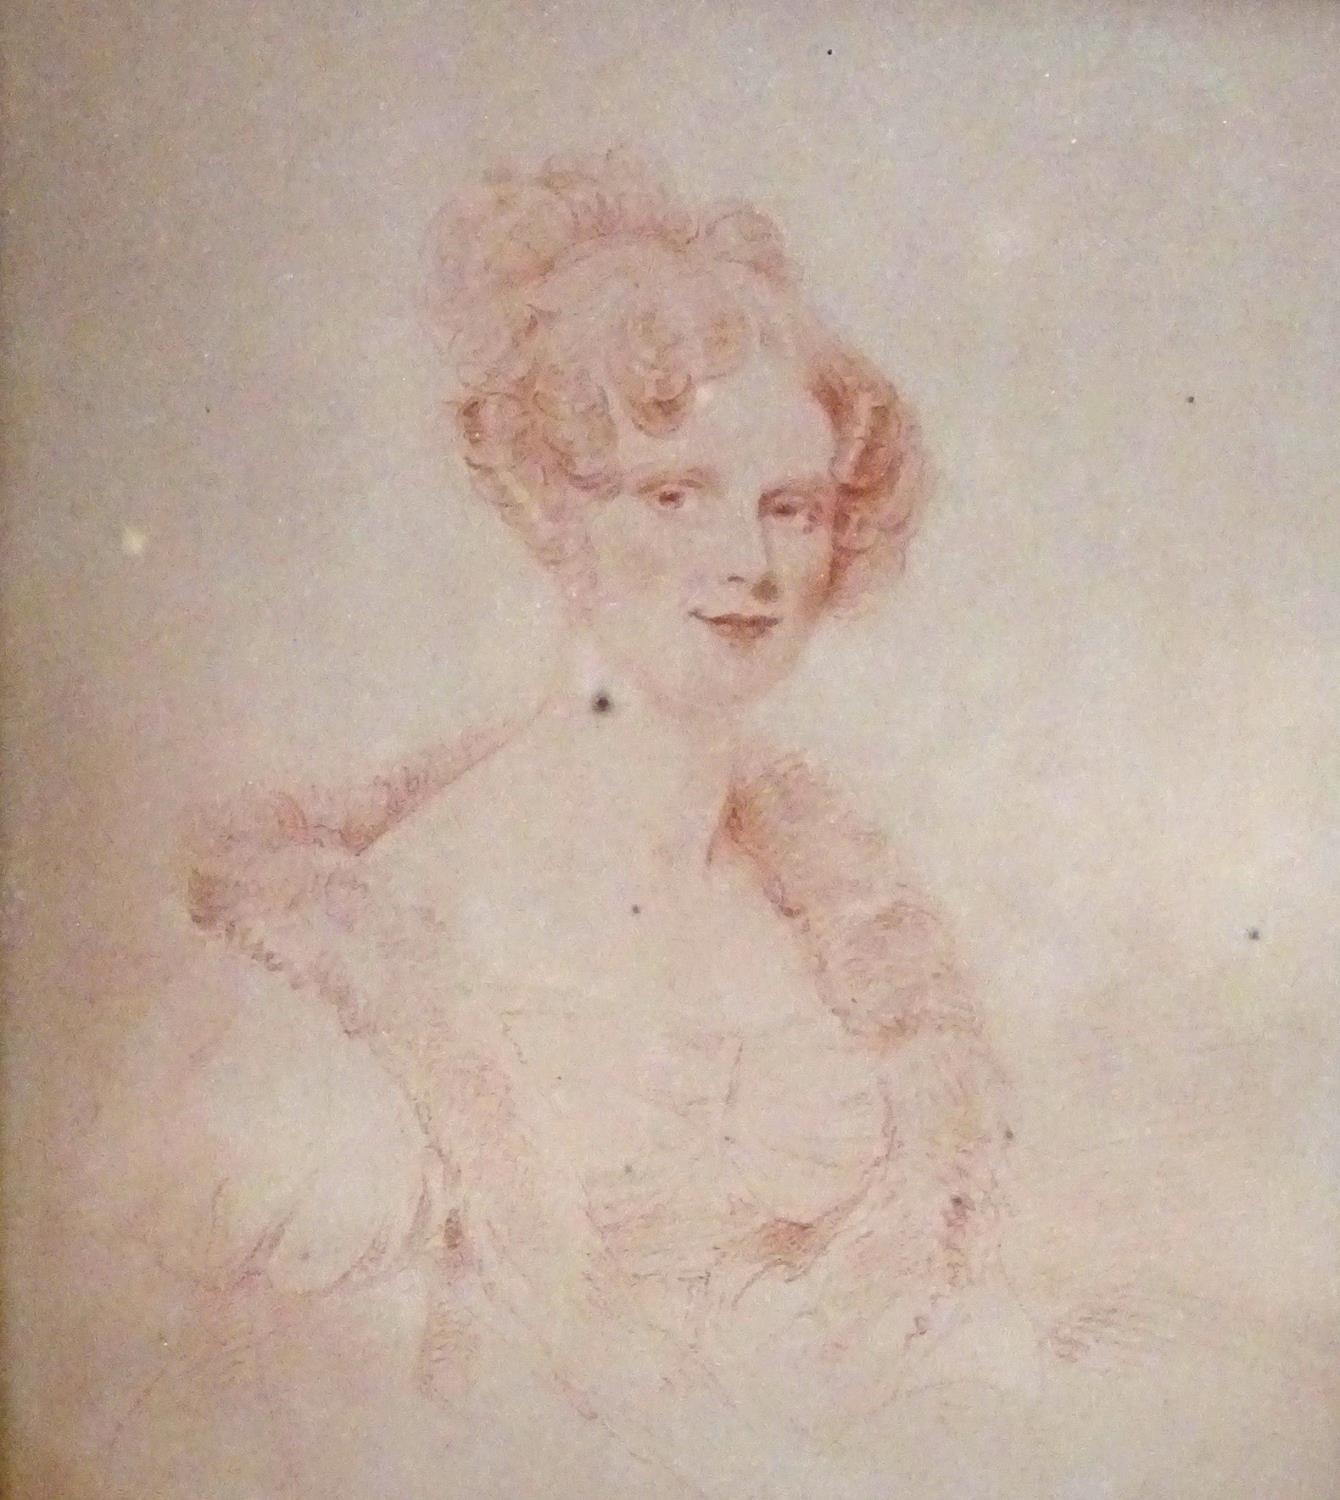 19th century, English School, Sanguine prints, Two portraits, A lady and a gentleman. Approx. 9" x - Image 5 of 5